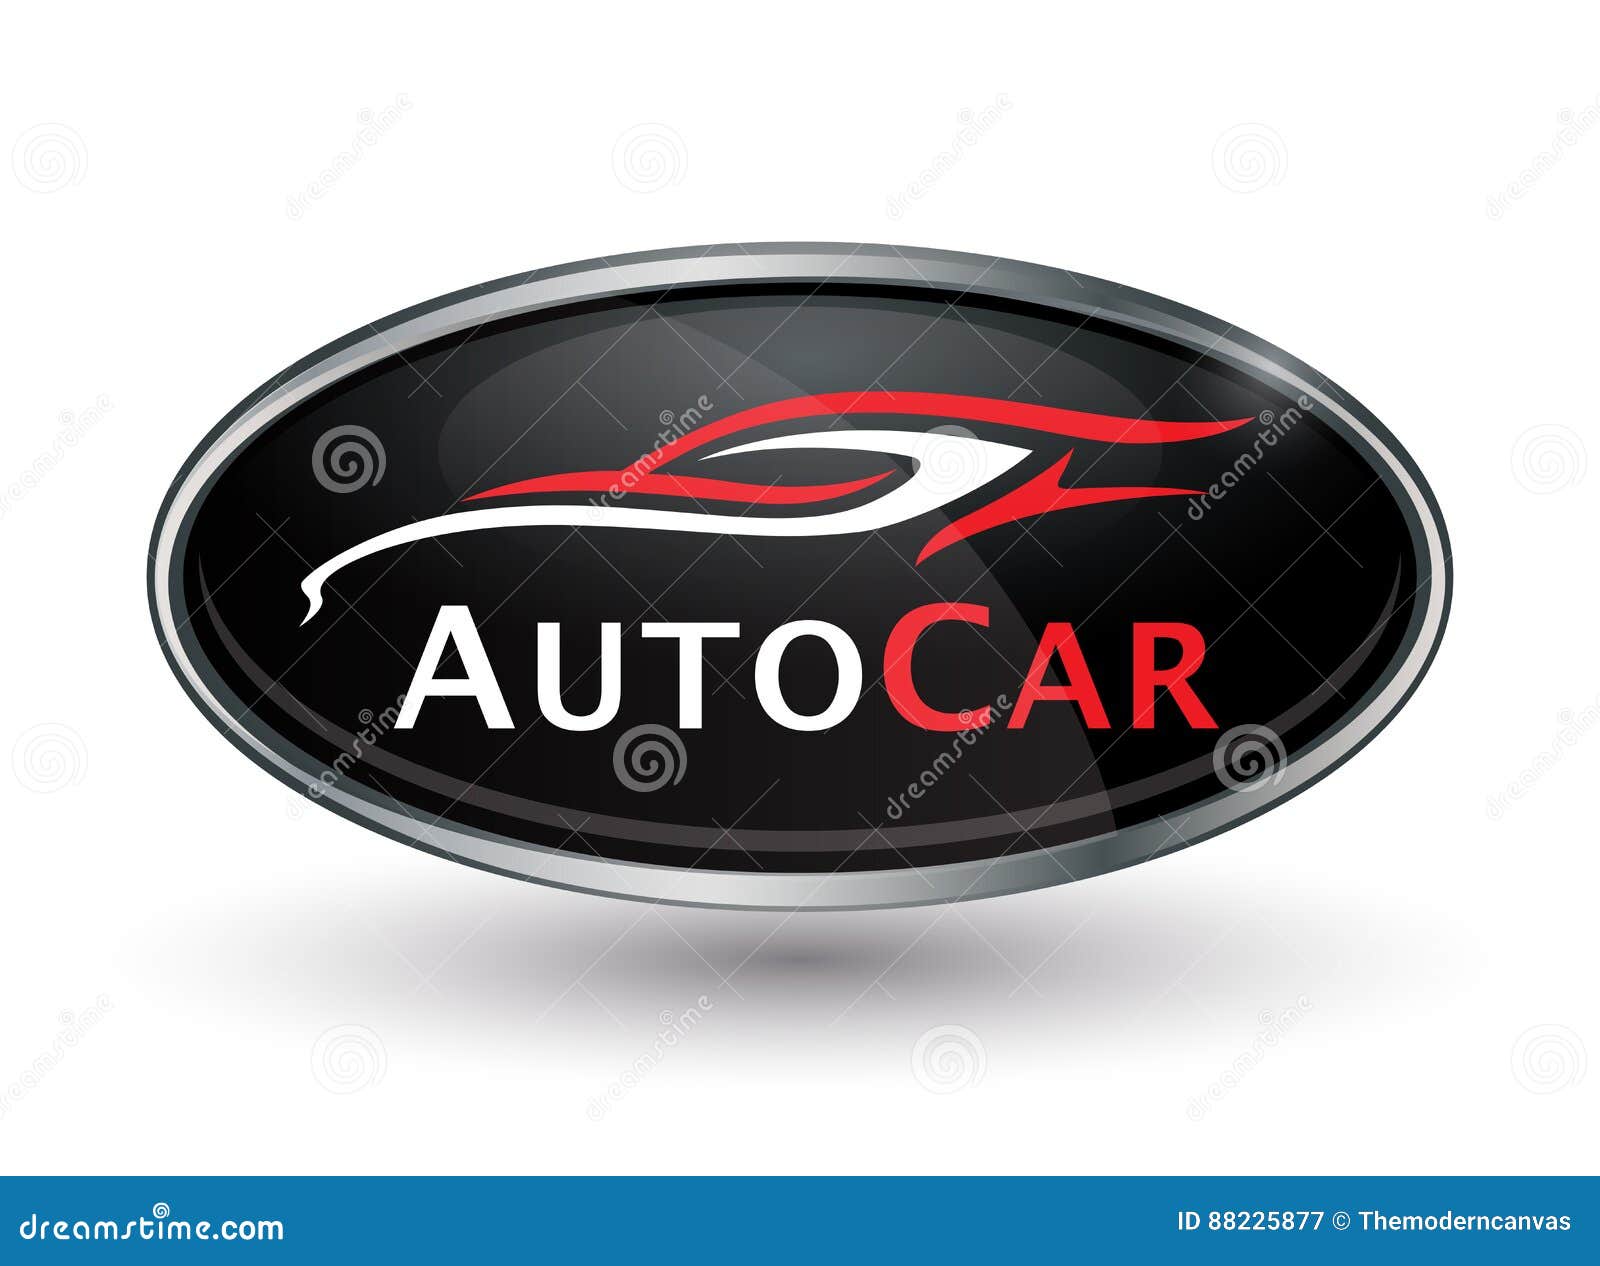 Name red and silver car logo